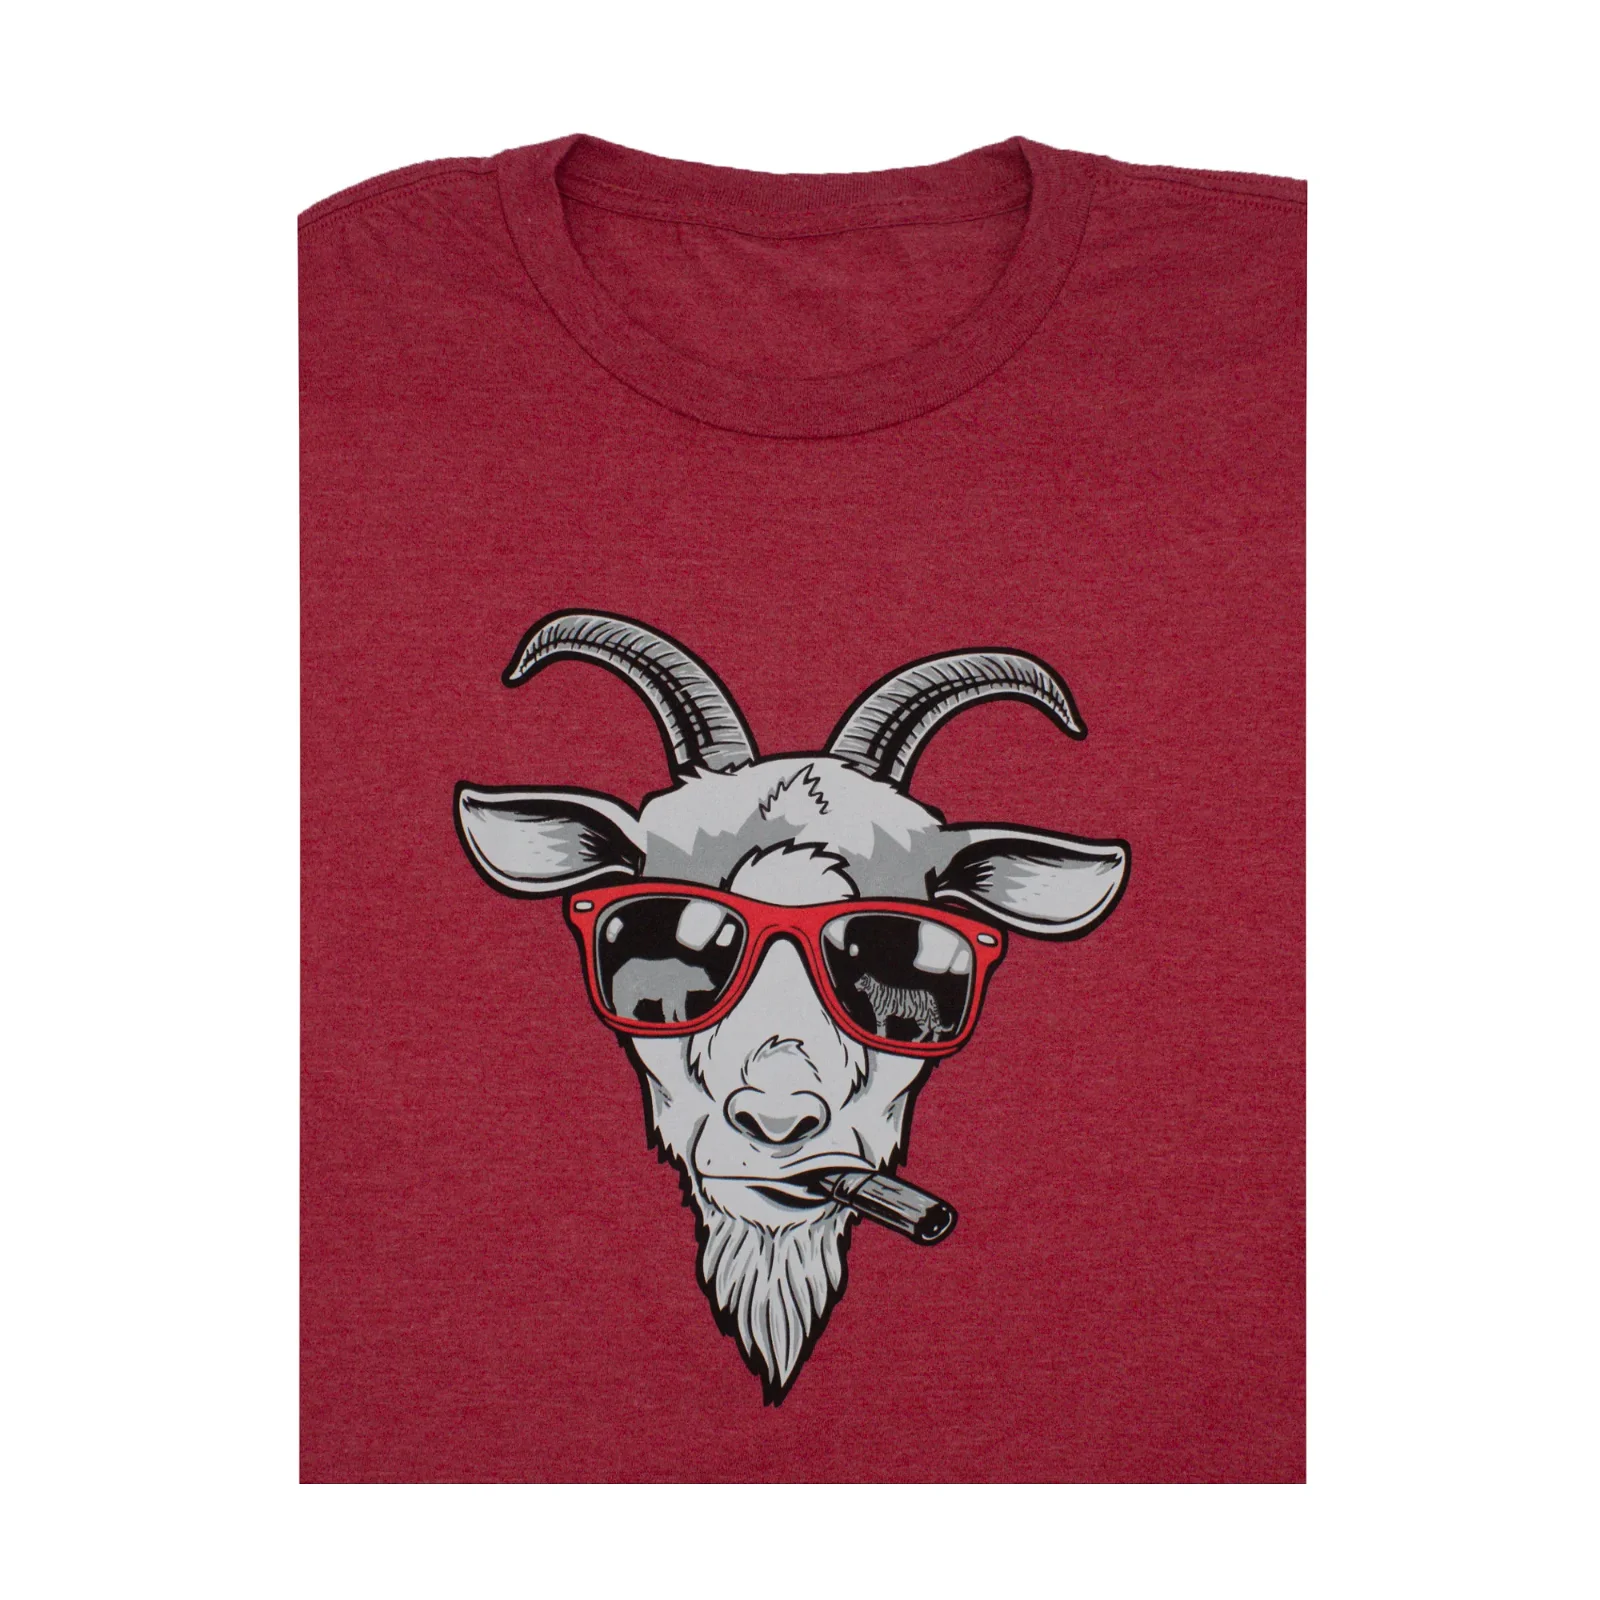 Image of Who's the G.O.A.T.? T-shirt - Heathered Red